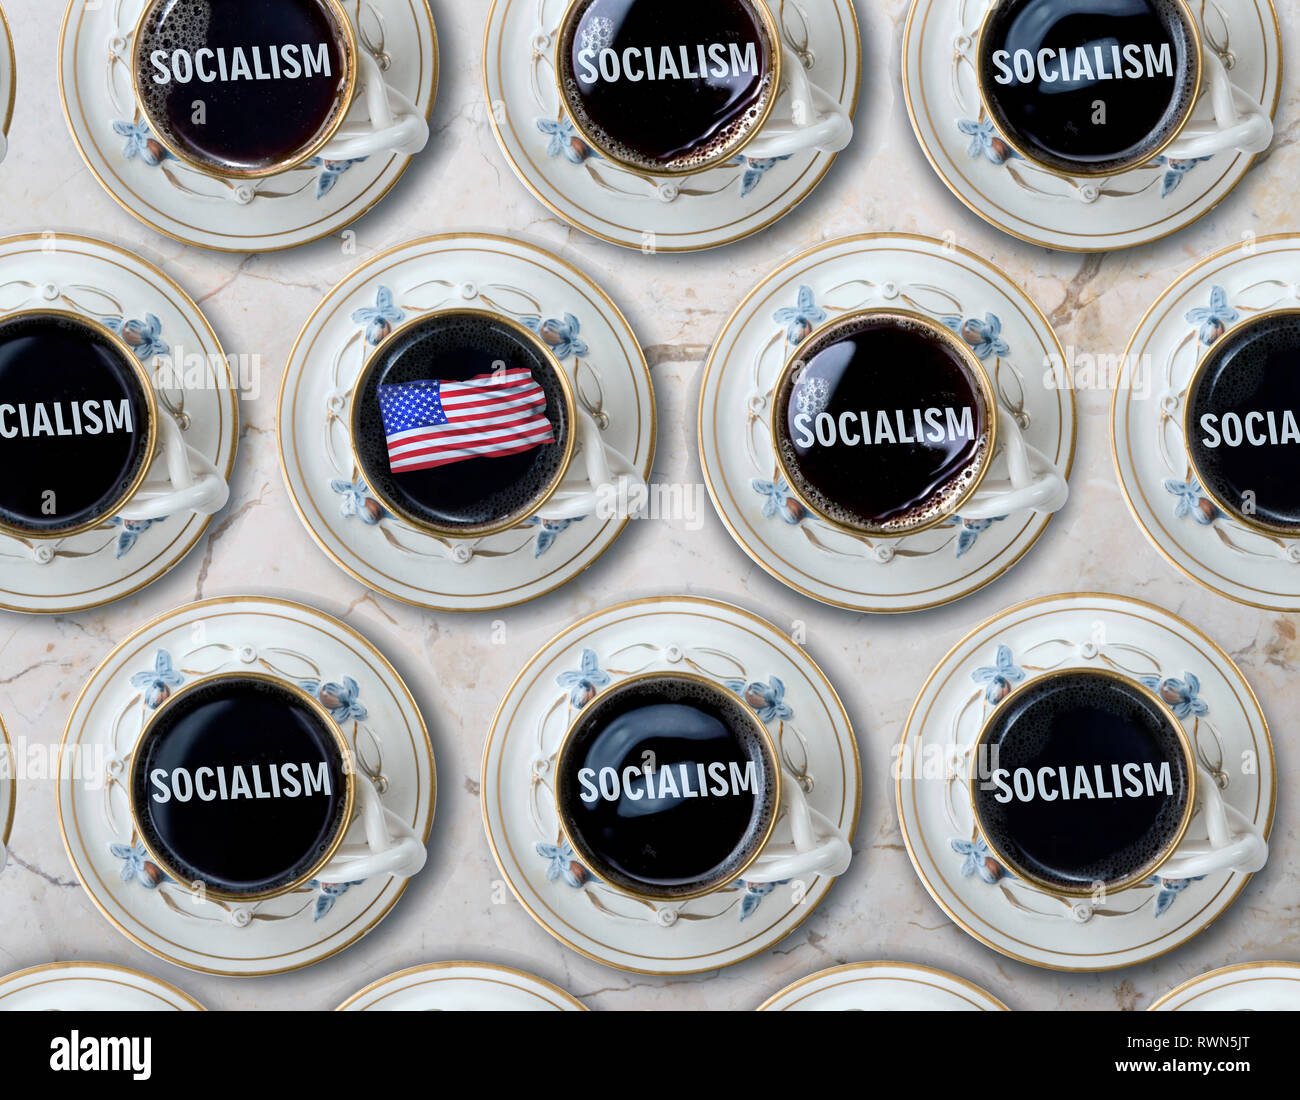 Coffee time for Americans surrounded by Socialist. Stock Photo